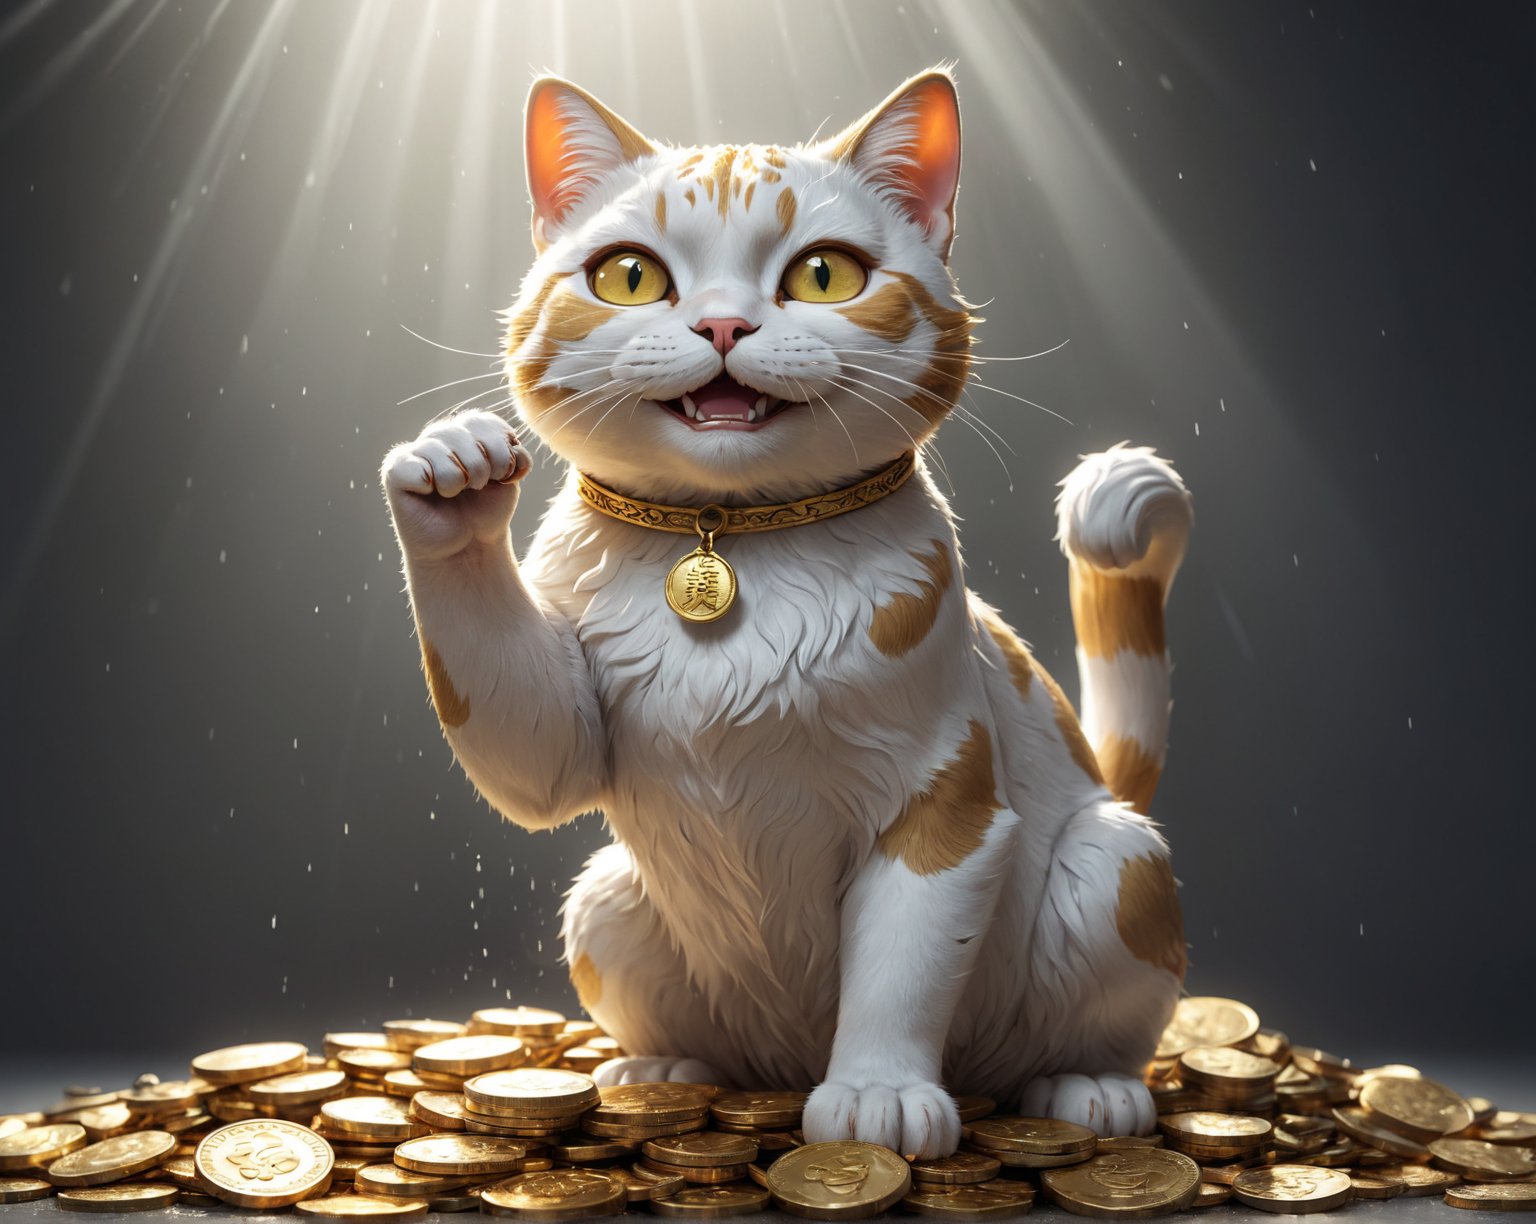 (best quality, masterpiece, highres, ultra-detailed, 8K, RAW image),high details, realisitc detailed, ultra realistic, a charming lucky cat with gold accessories, golden glowing eyes, inlit by a stark white studio light casting an intricate shadows, eye contact, kind smile, bliss, willowy, chiseled, perfect anatomy, 4 fingers, holding sparkling giant gold coin, raining golden coins, stand on top of a pile of golden coins
chrometech, surface imperfections,cinematic_warm_color,colorful,color art, 